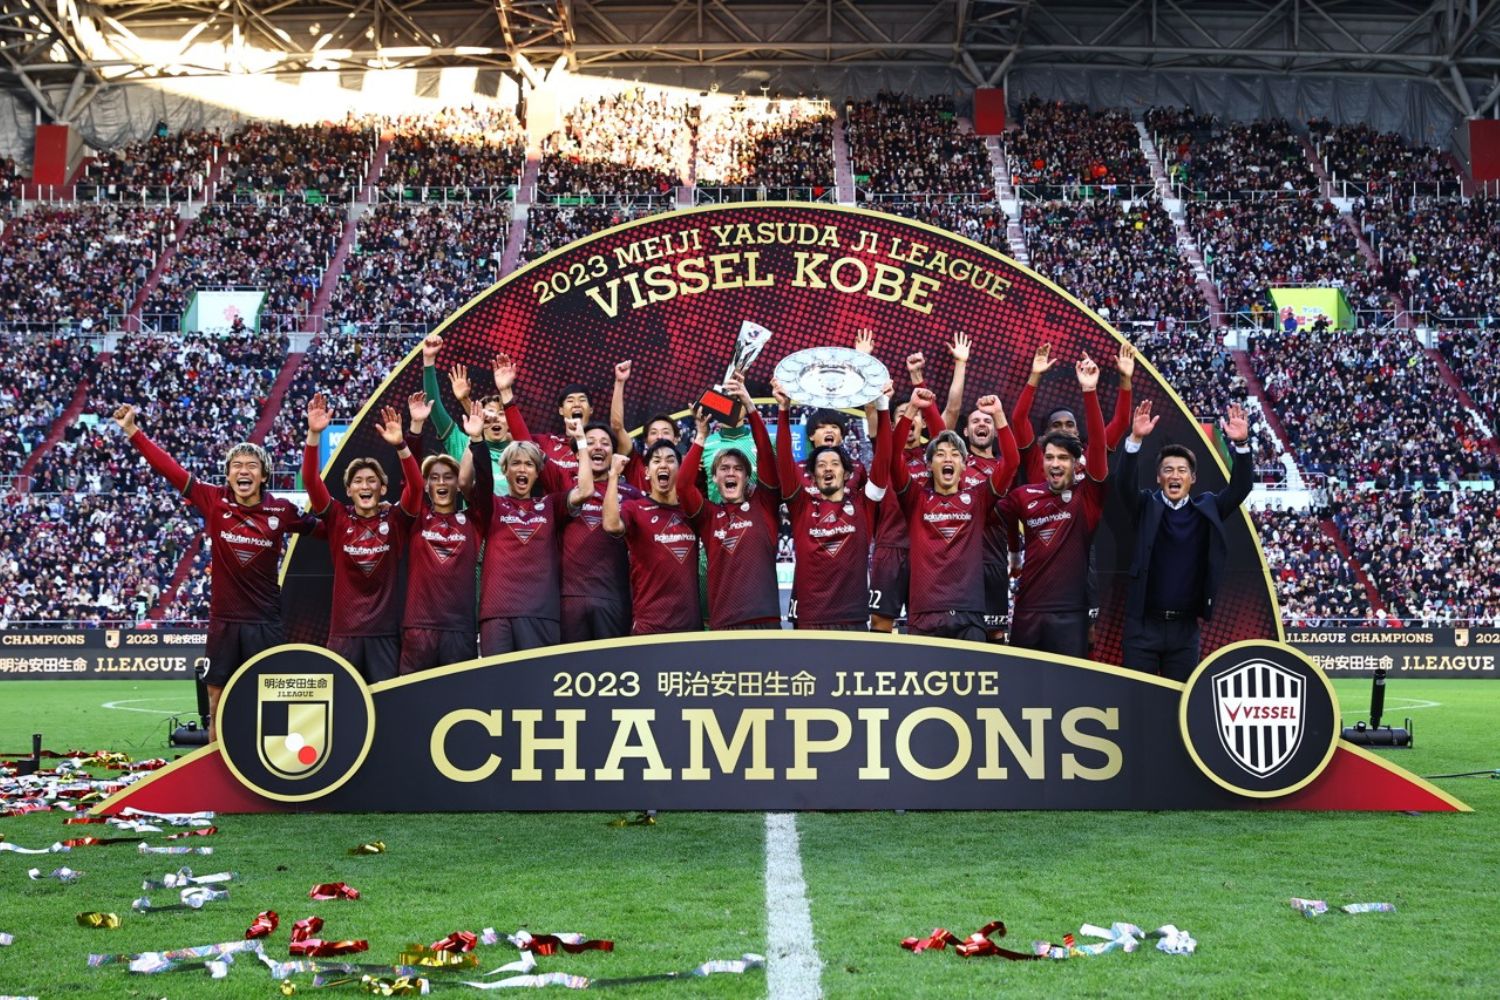 With a win over Nagoya in late November 2023, Vissel Kobe clinched its first-ever J.League championship after dominating the 2023 season.